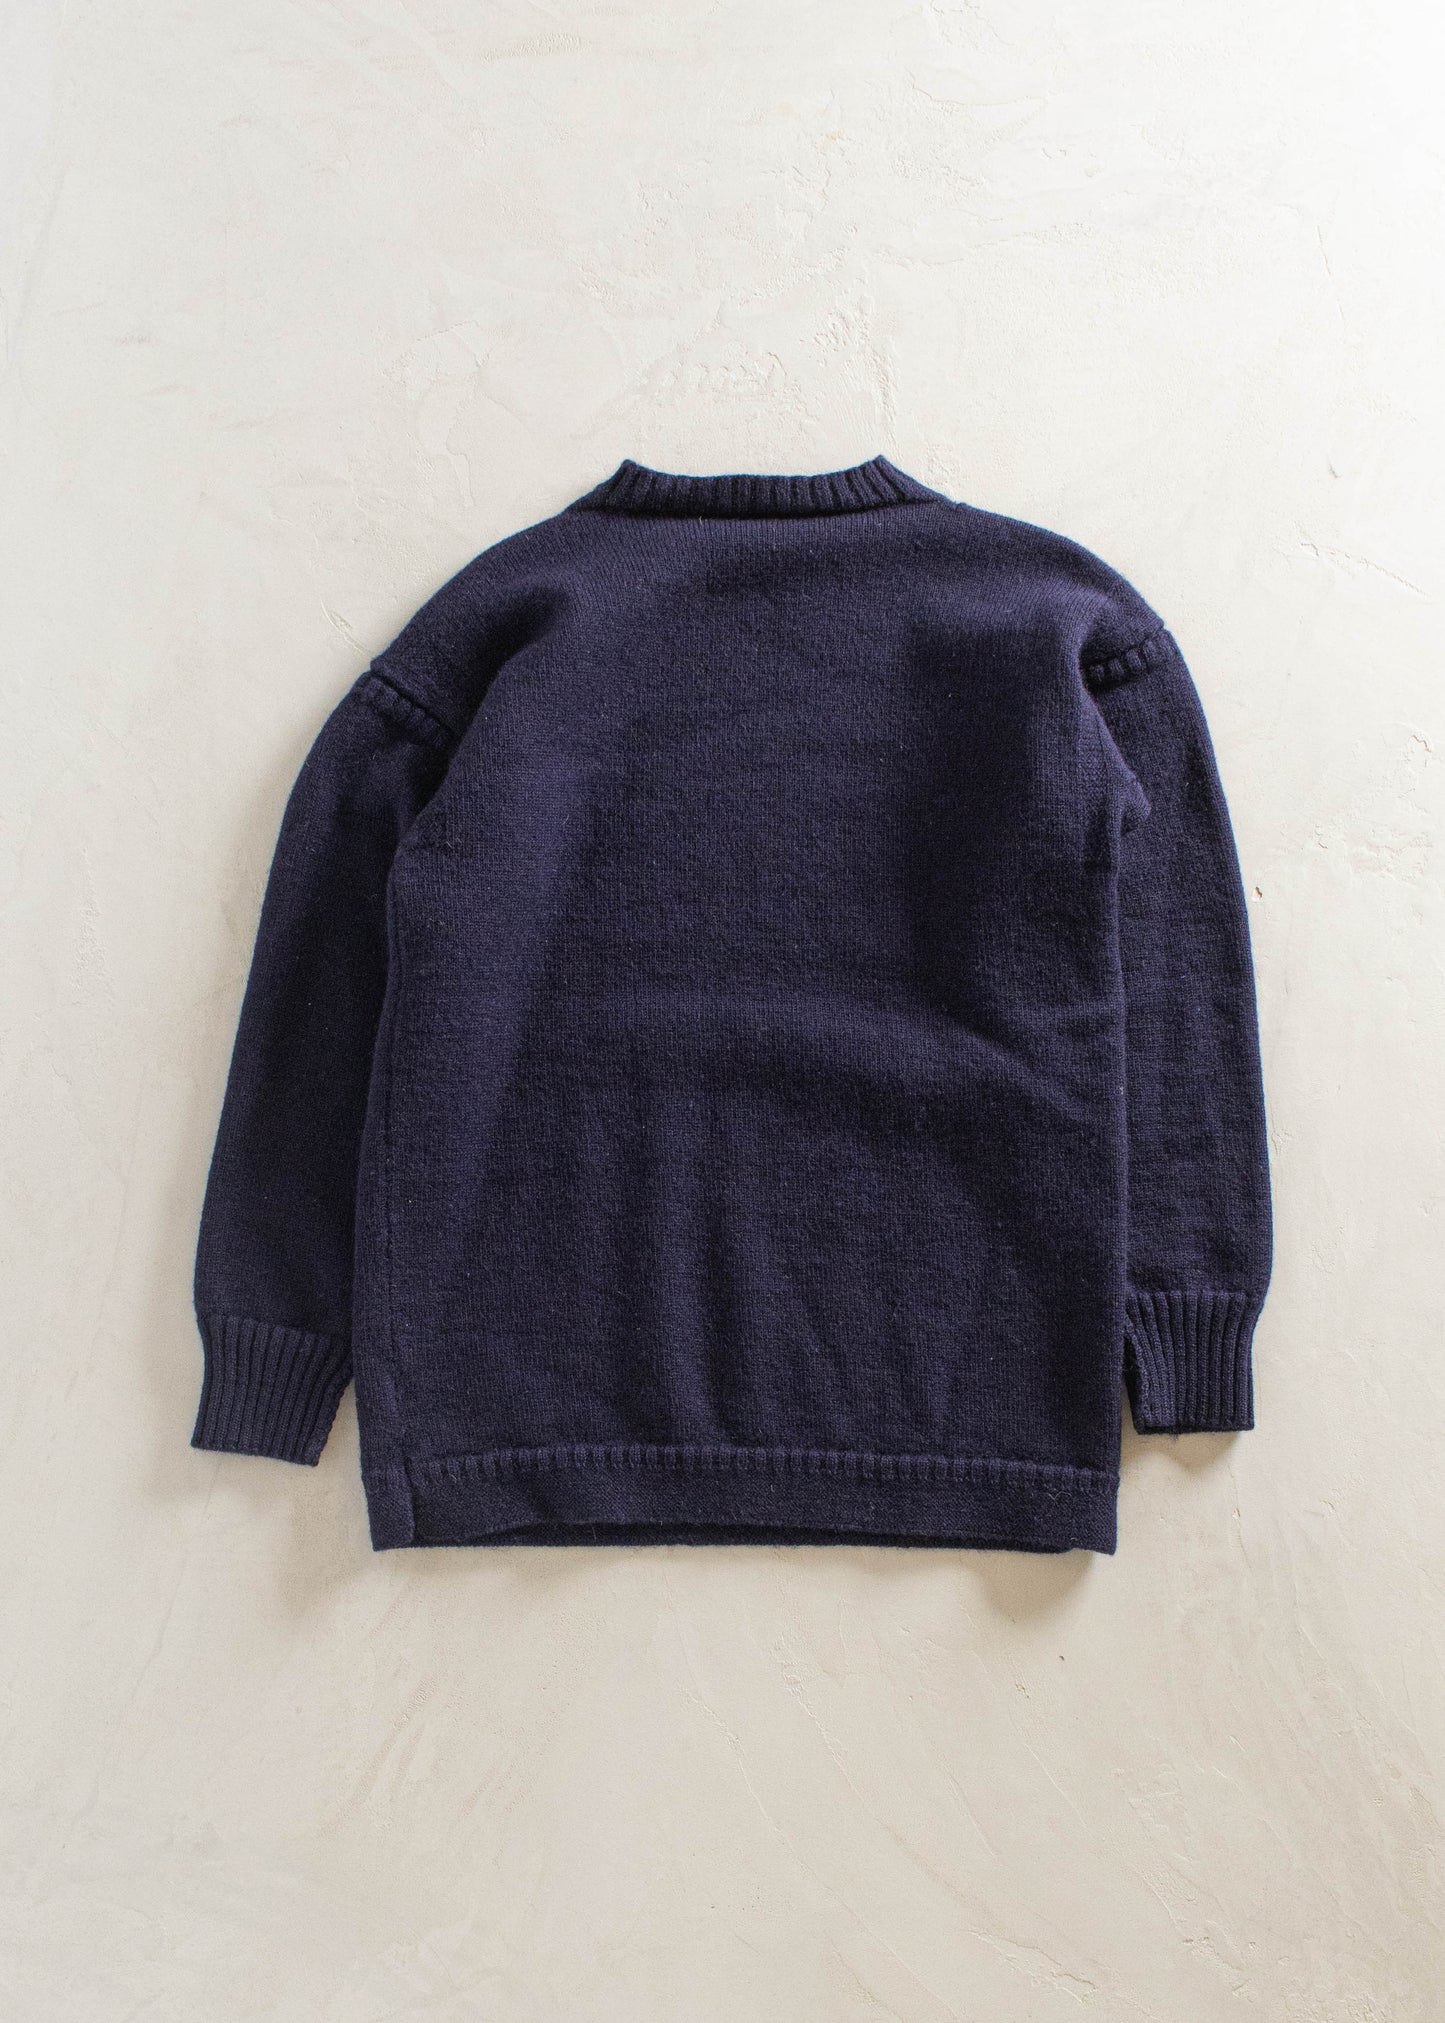 1980s Wool Pullover Sweater Size S/M